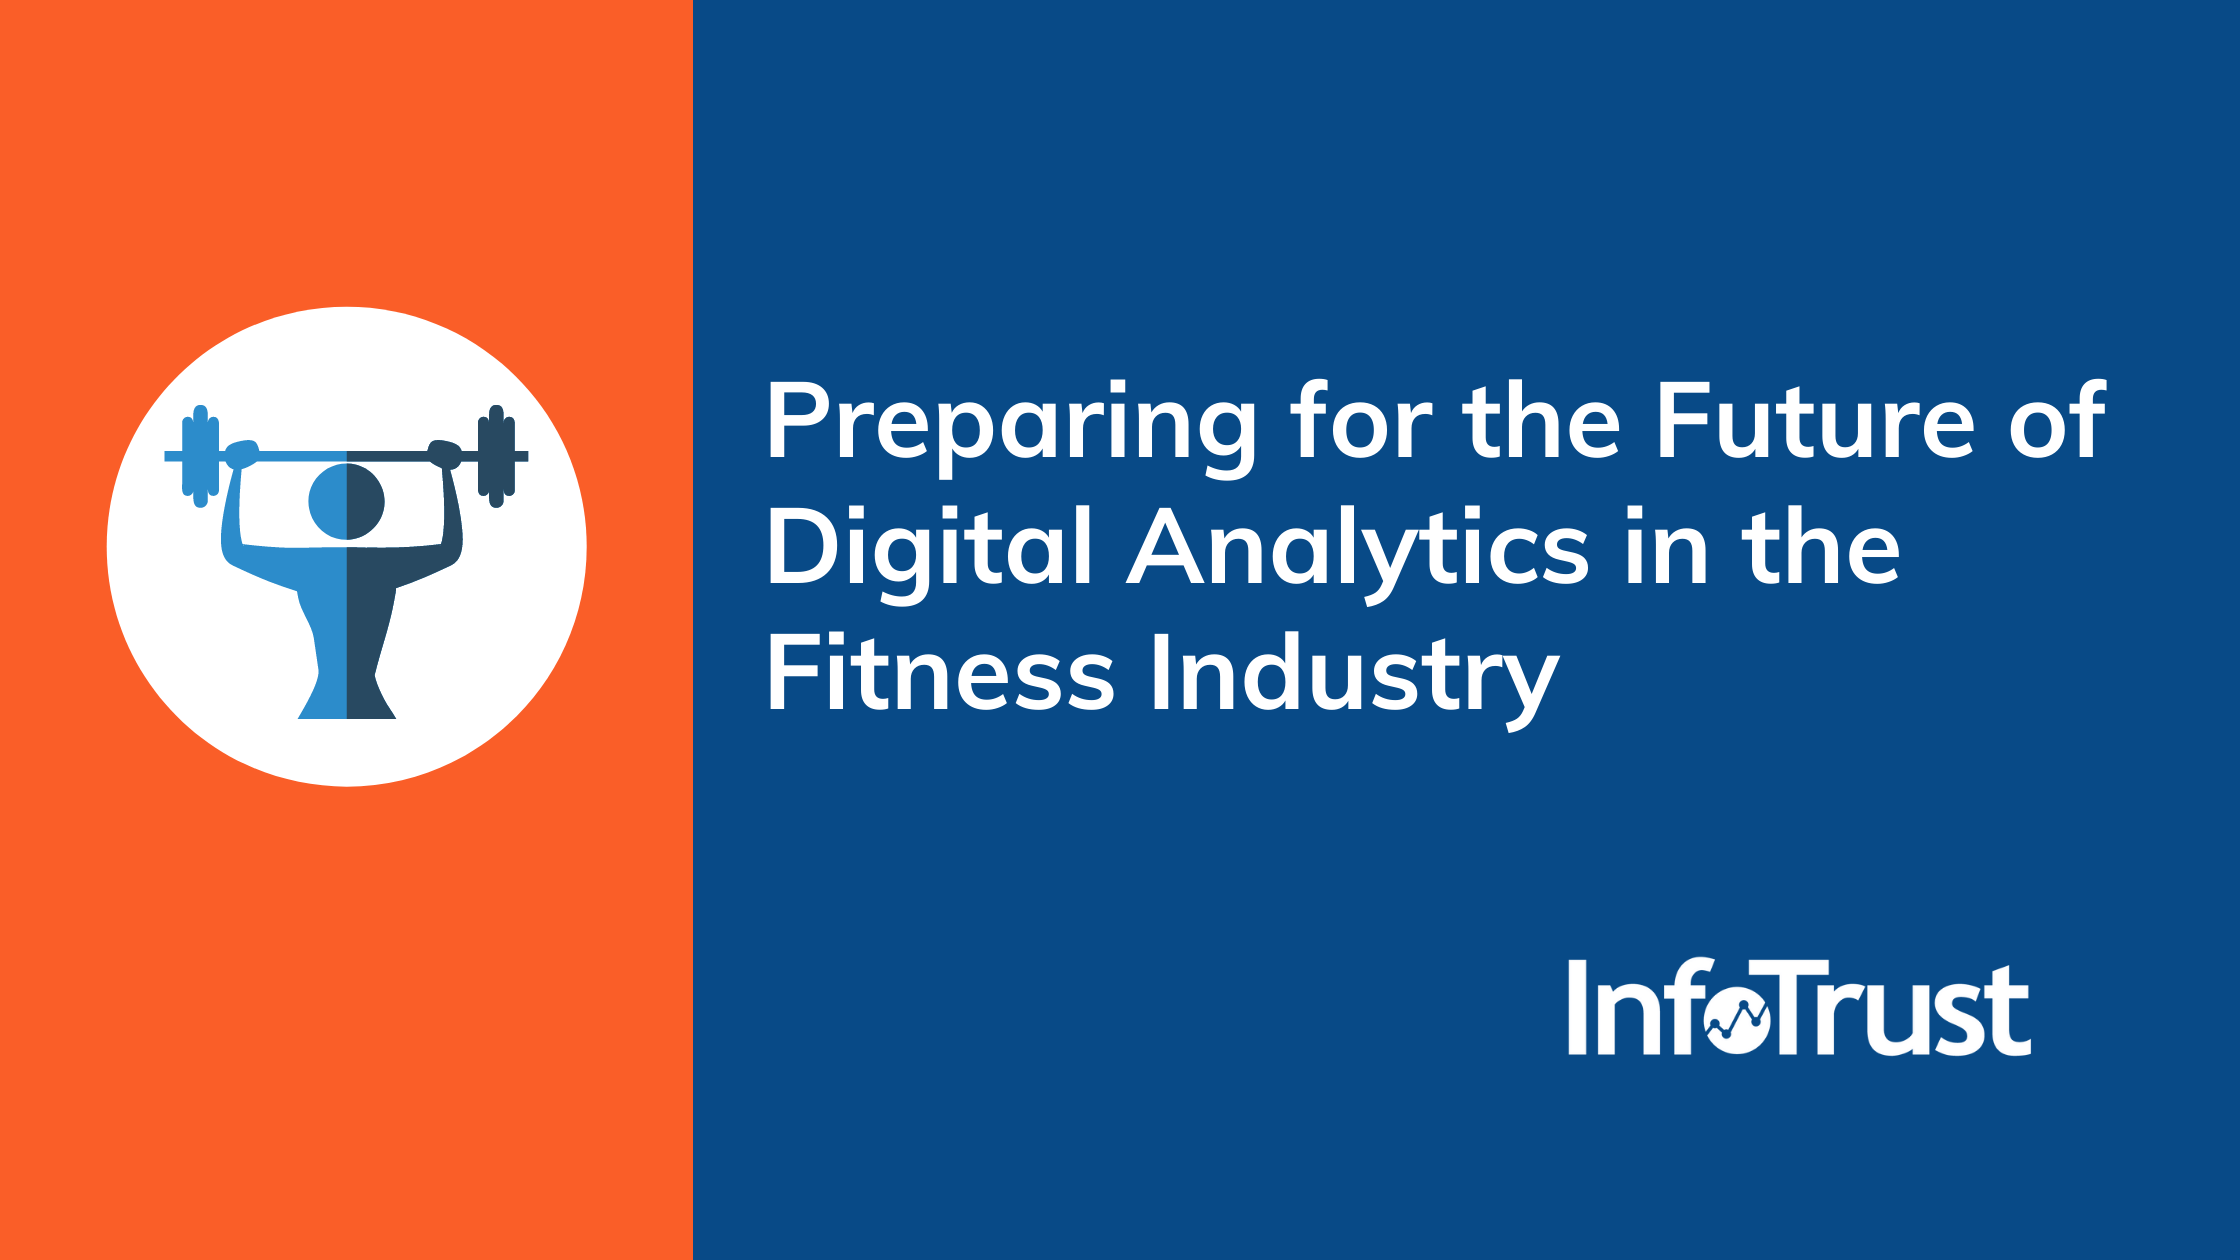 Preparing for the Future of Digital Analytics in the Fitness Industry